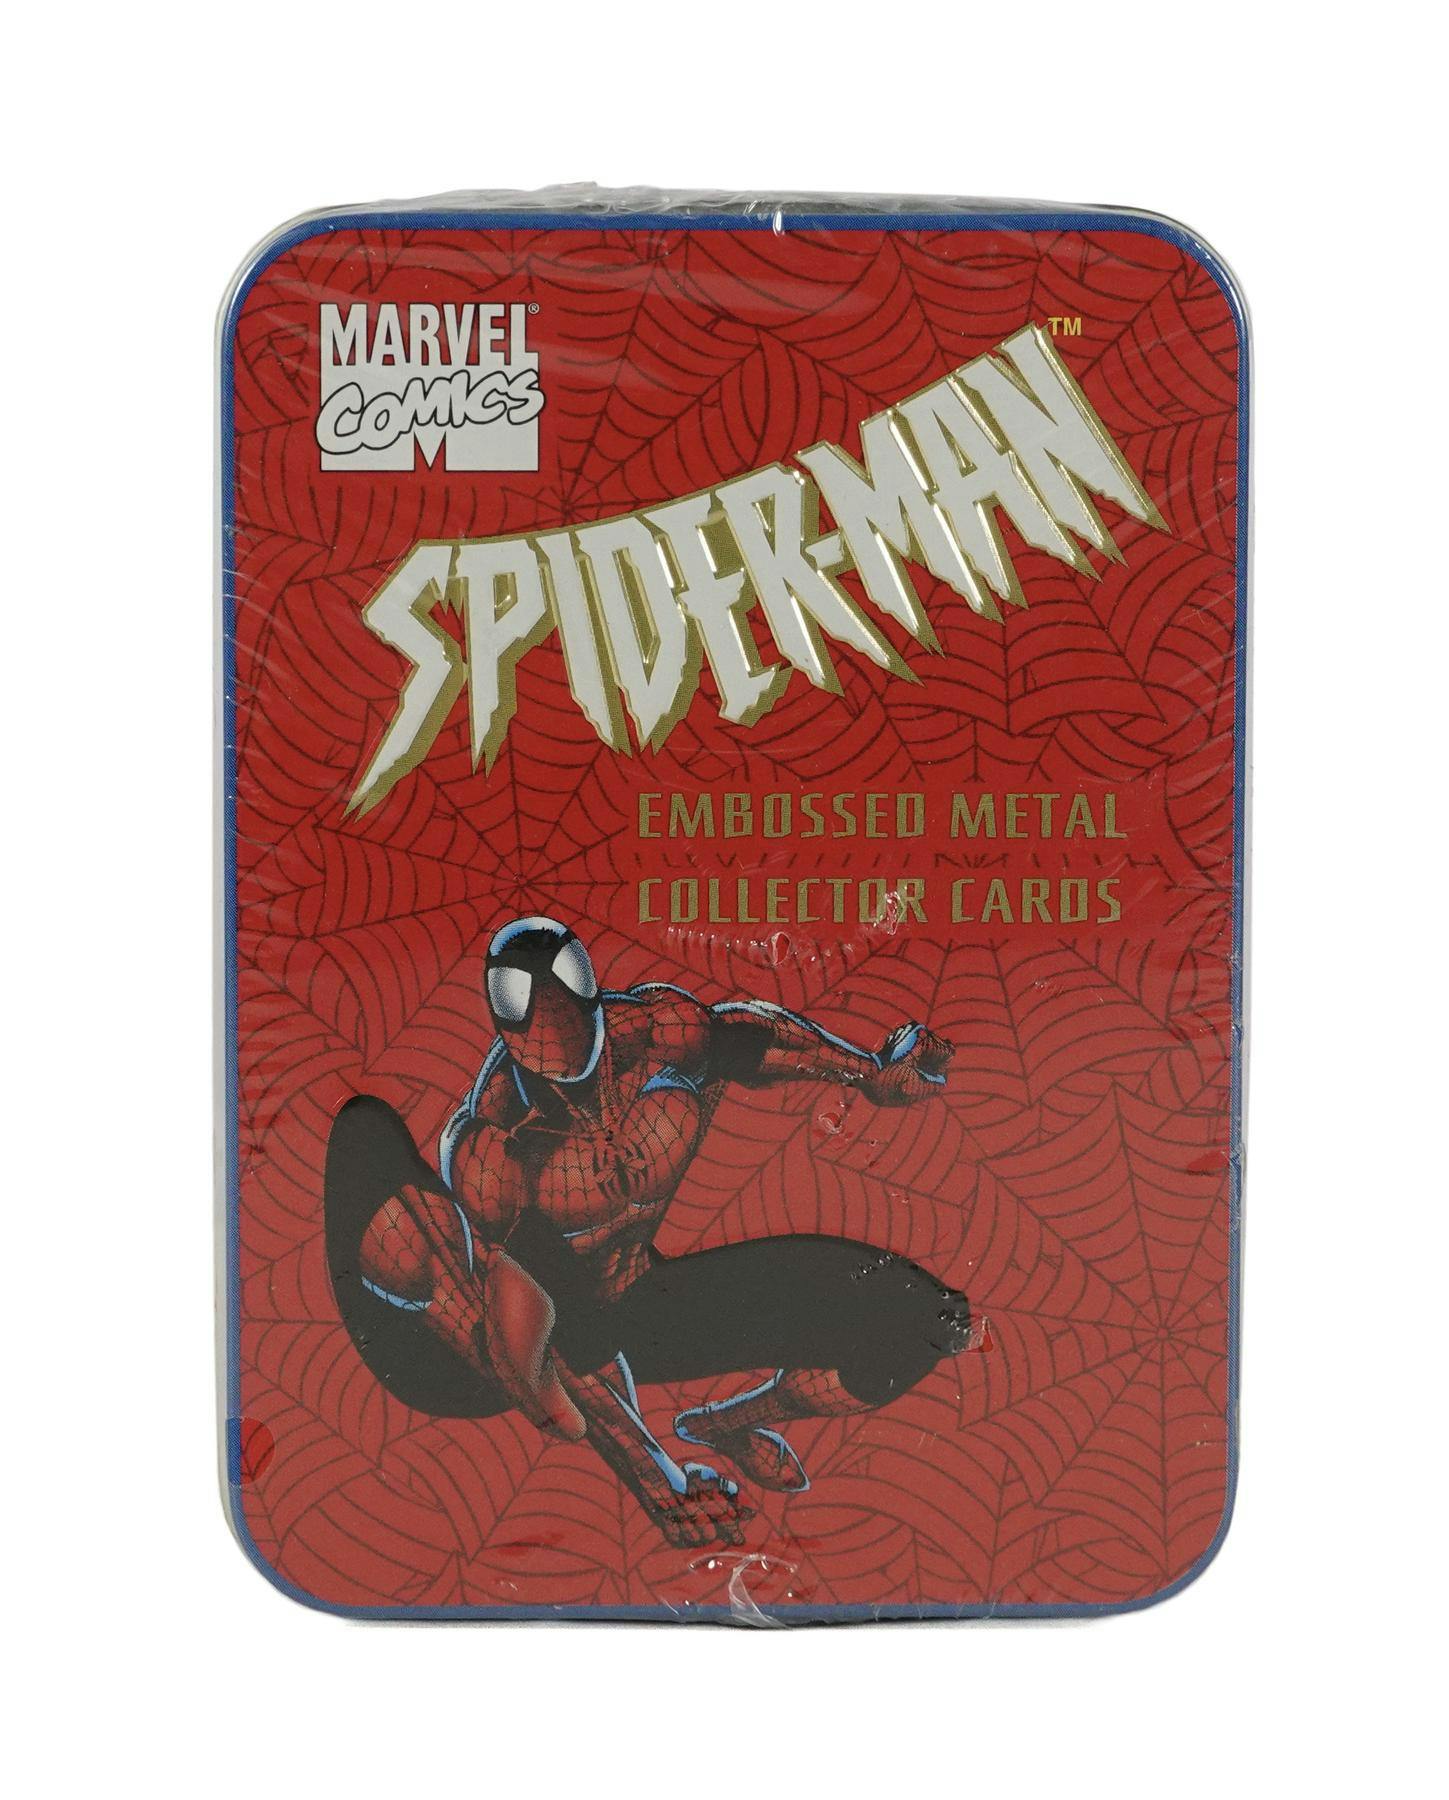 Spider-man Embossed Metal Collector Cards Tin (1996 Metallic Impressions)